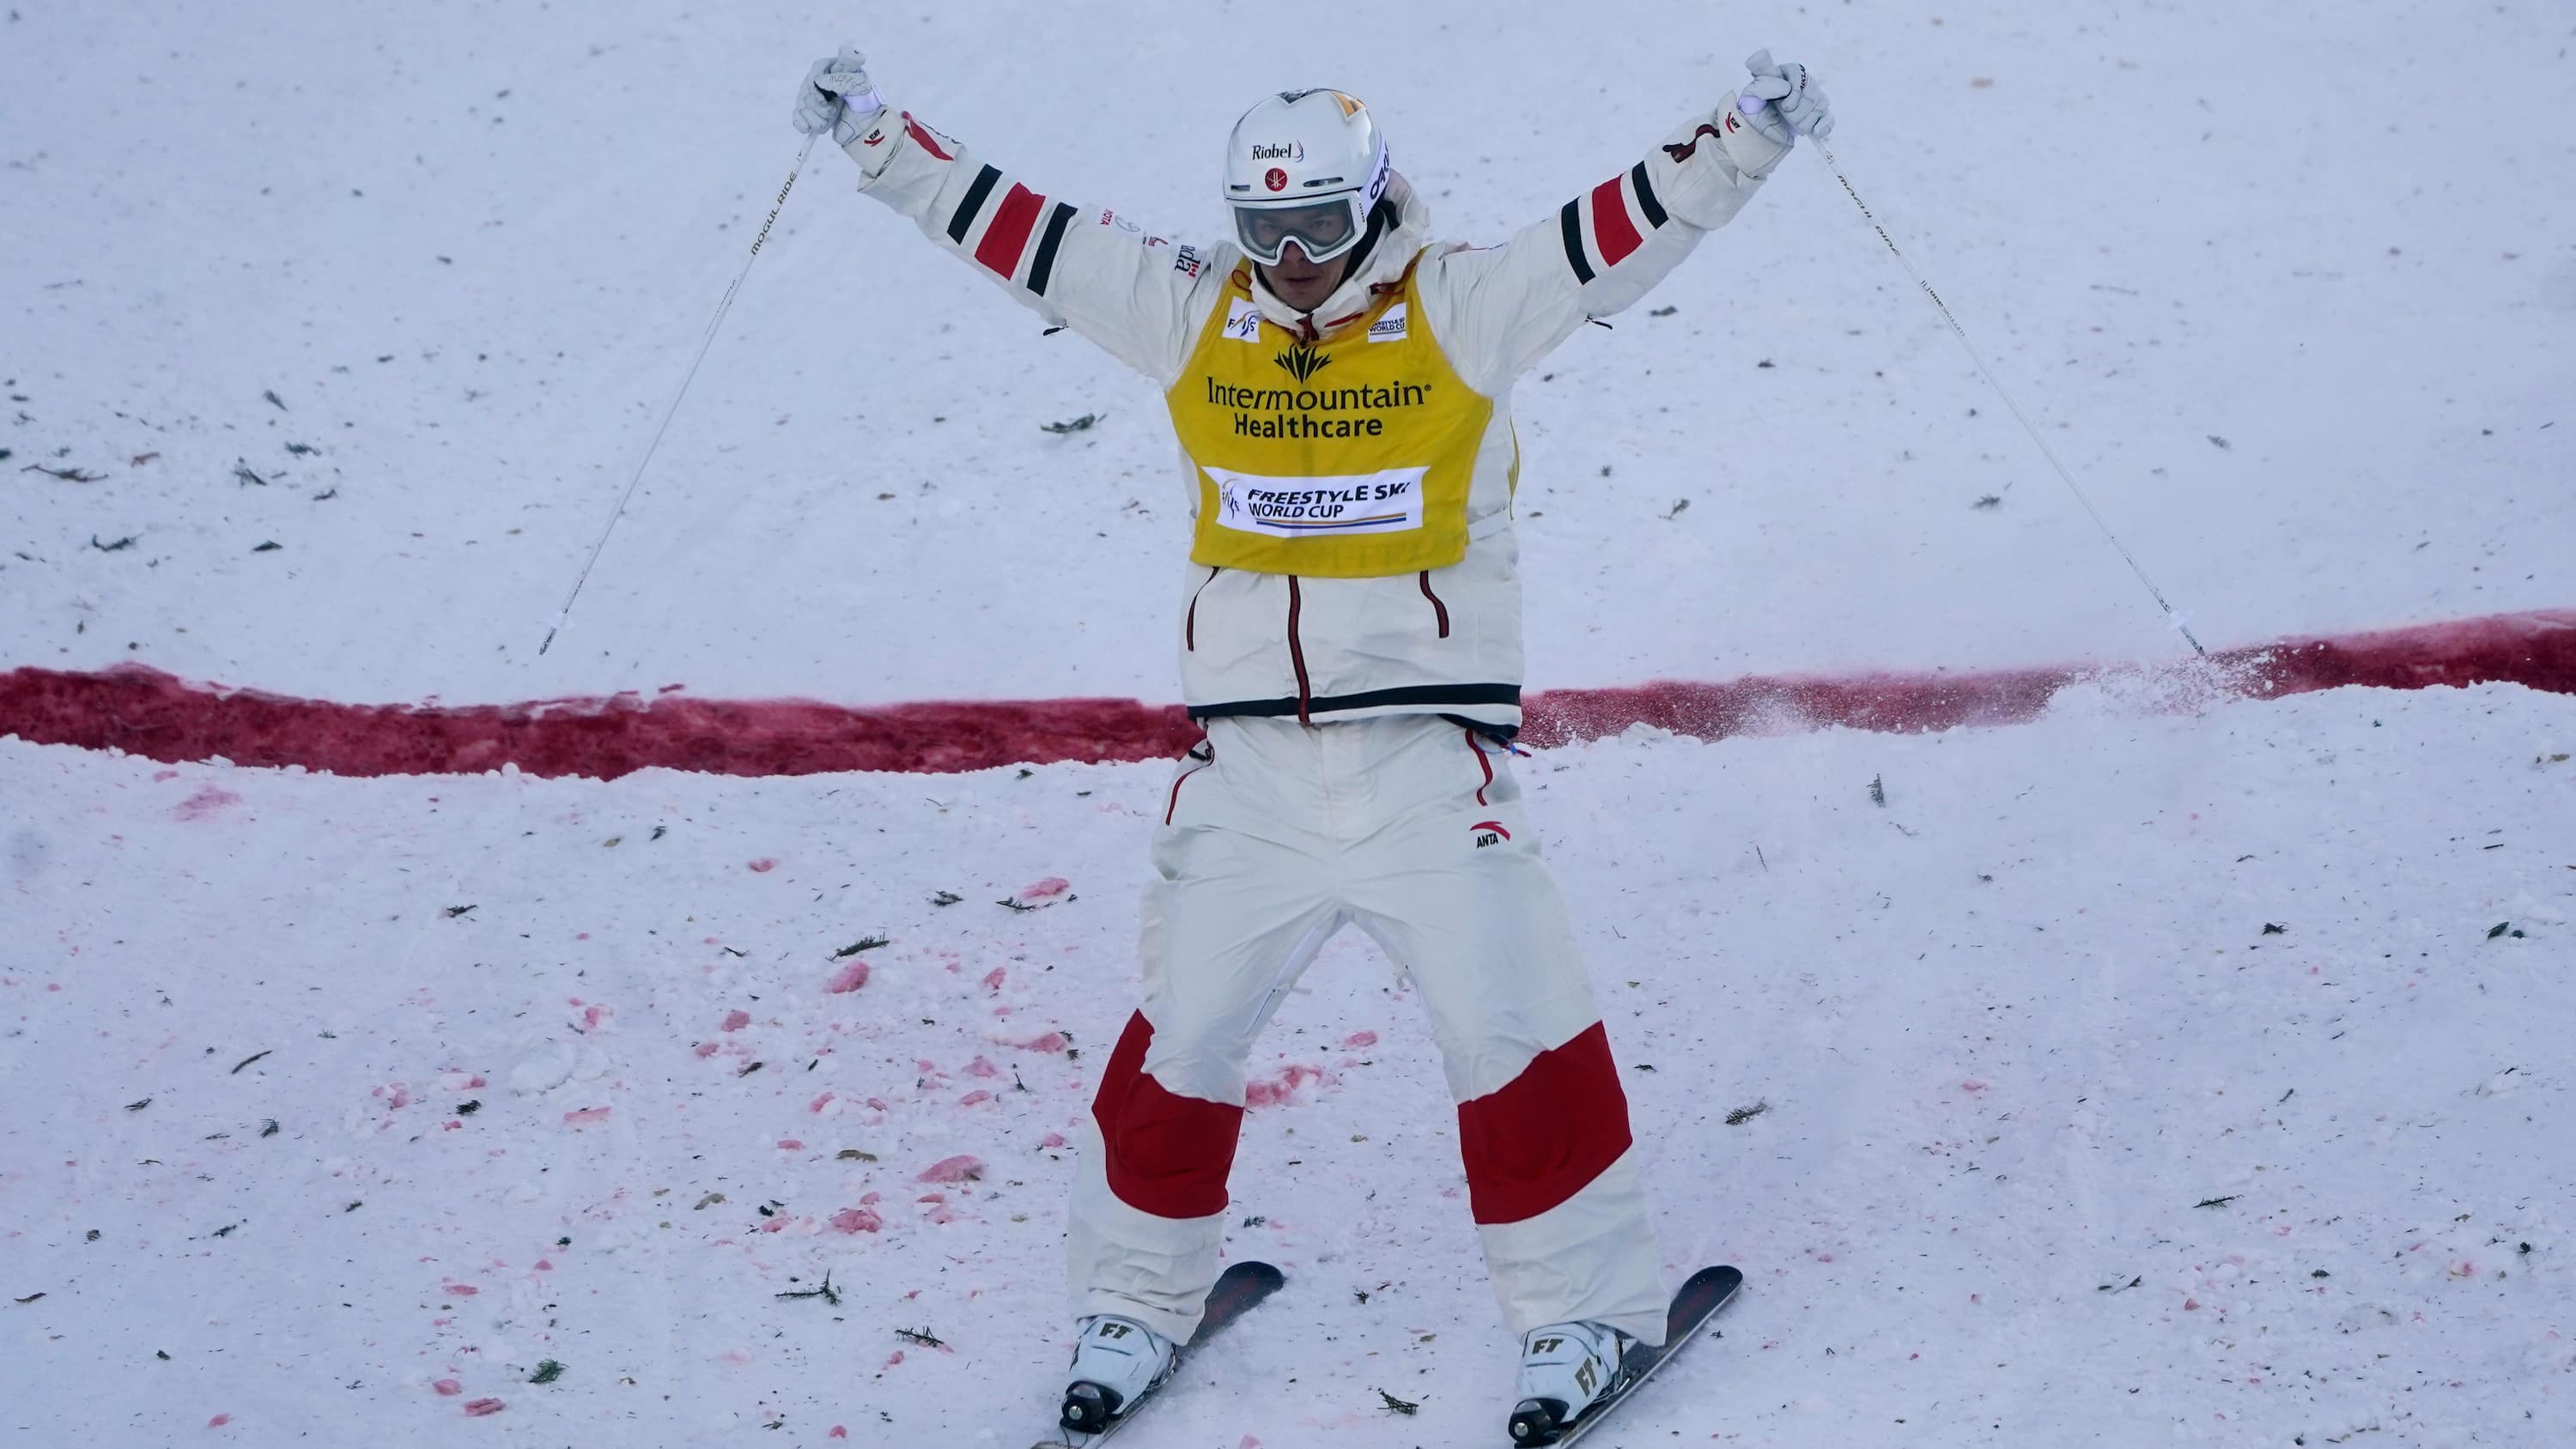 Canadian moguls legend Kingsbury had family close to heart in silver-medal performance